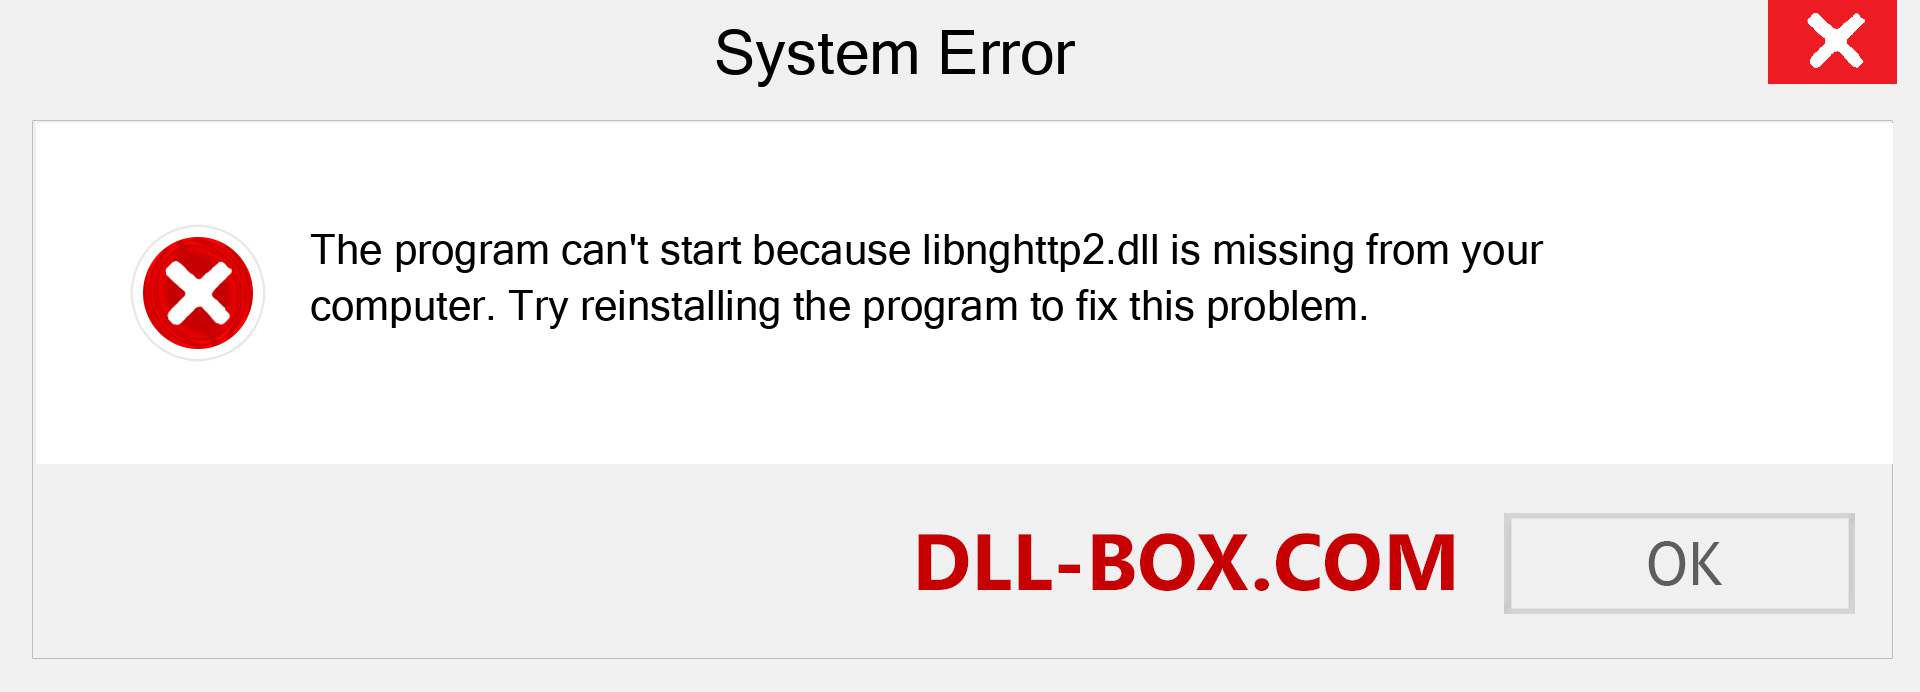  libnghttp2.dll file is missing?. Download for Windows 7, 8, 10 - Fix  libnghttp2 dll Missing Error on Windows, photos, images